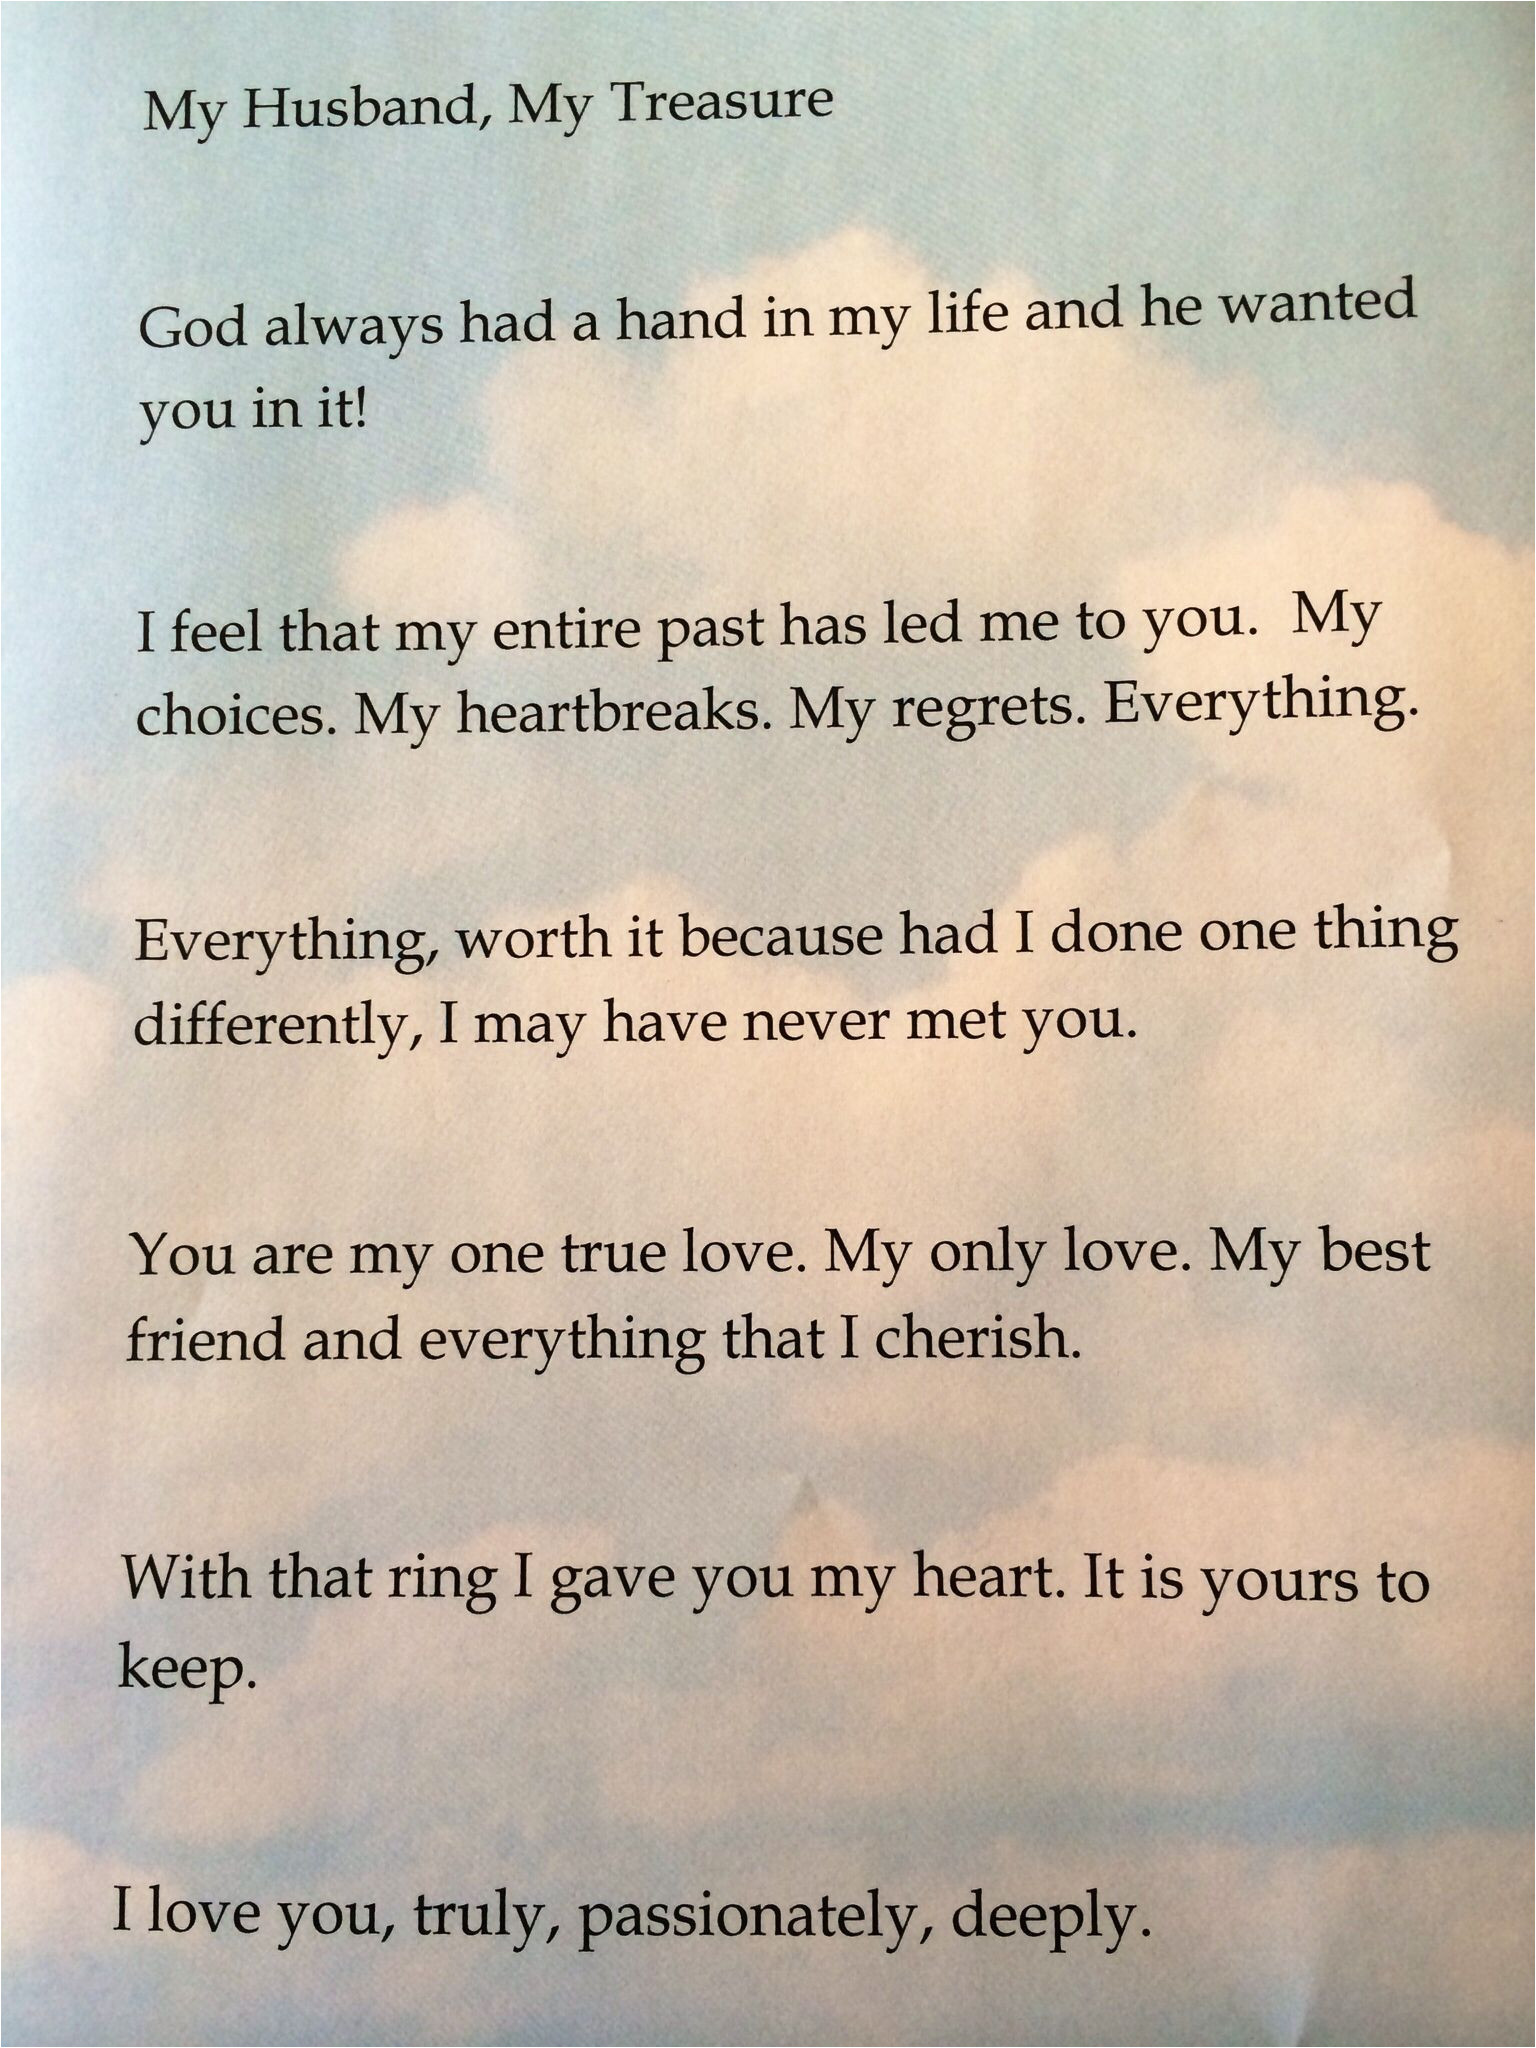 Card Verses for Renewal Of Wedding Vows Wedding Vows Renewal Vows From the Heart Simple Heartfelt